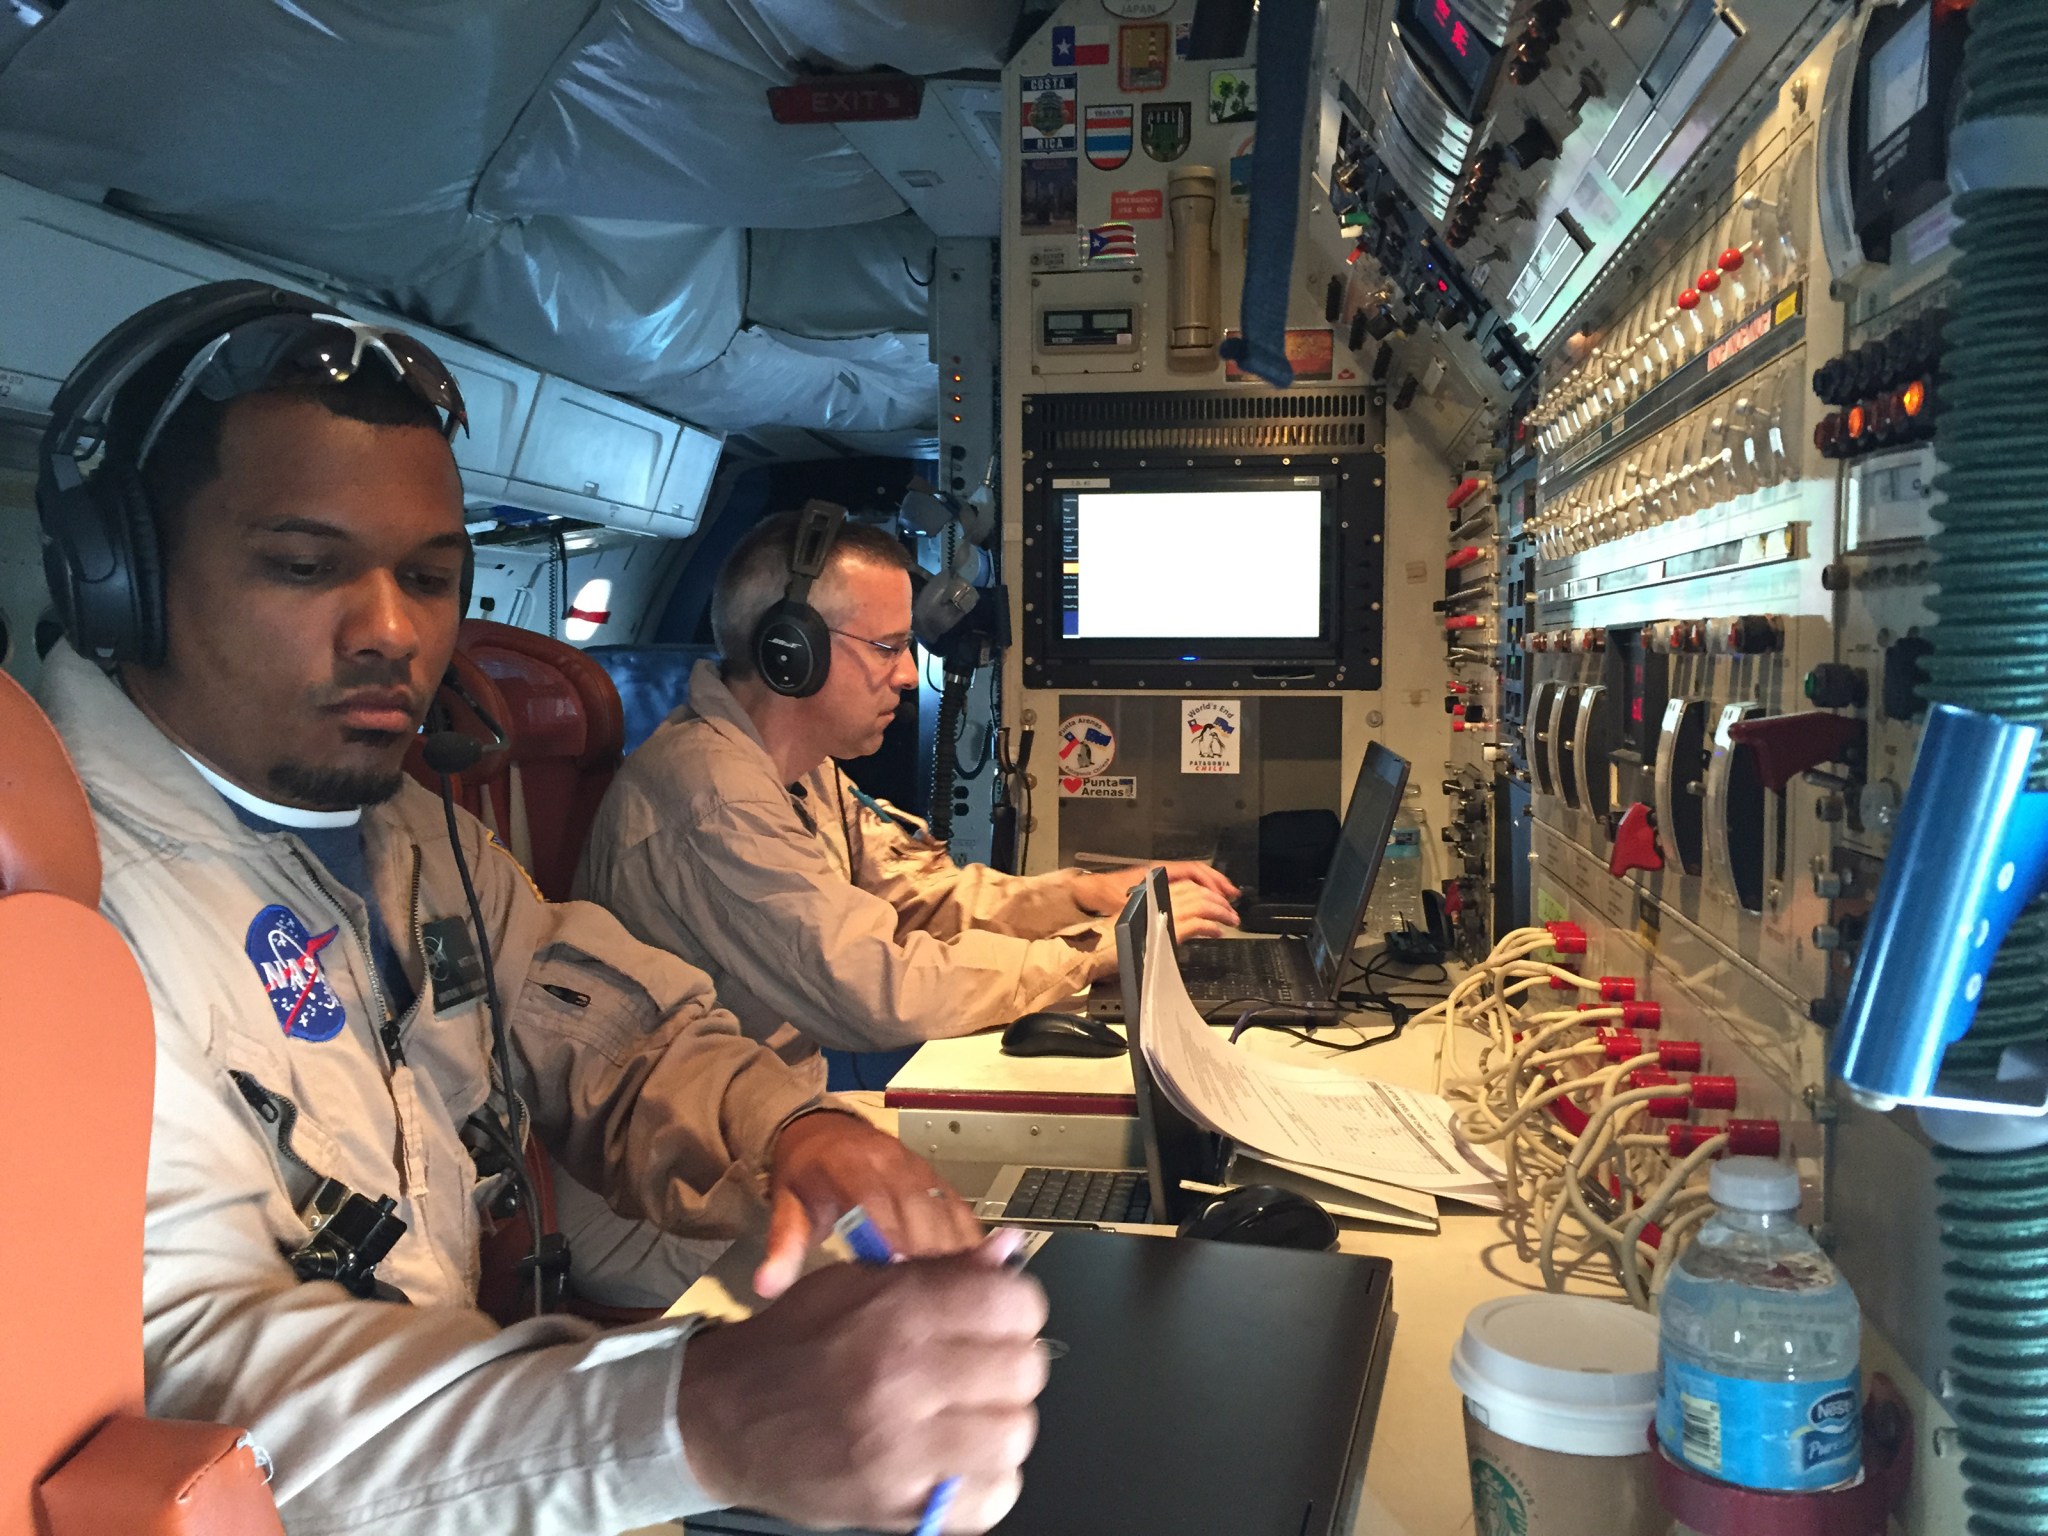 Two men inside the DC-8 aircraft at the operations console.